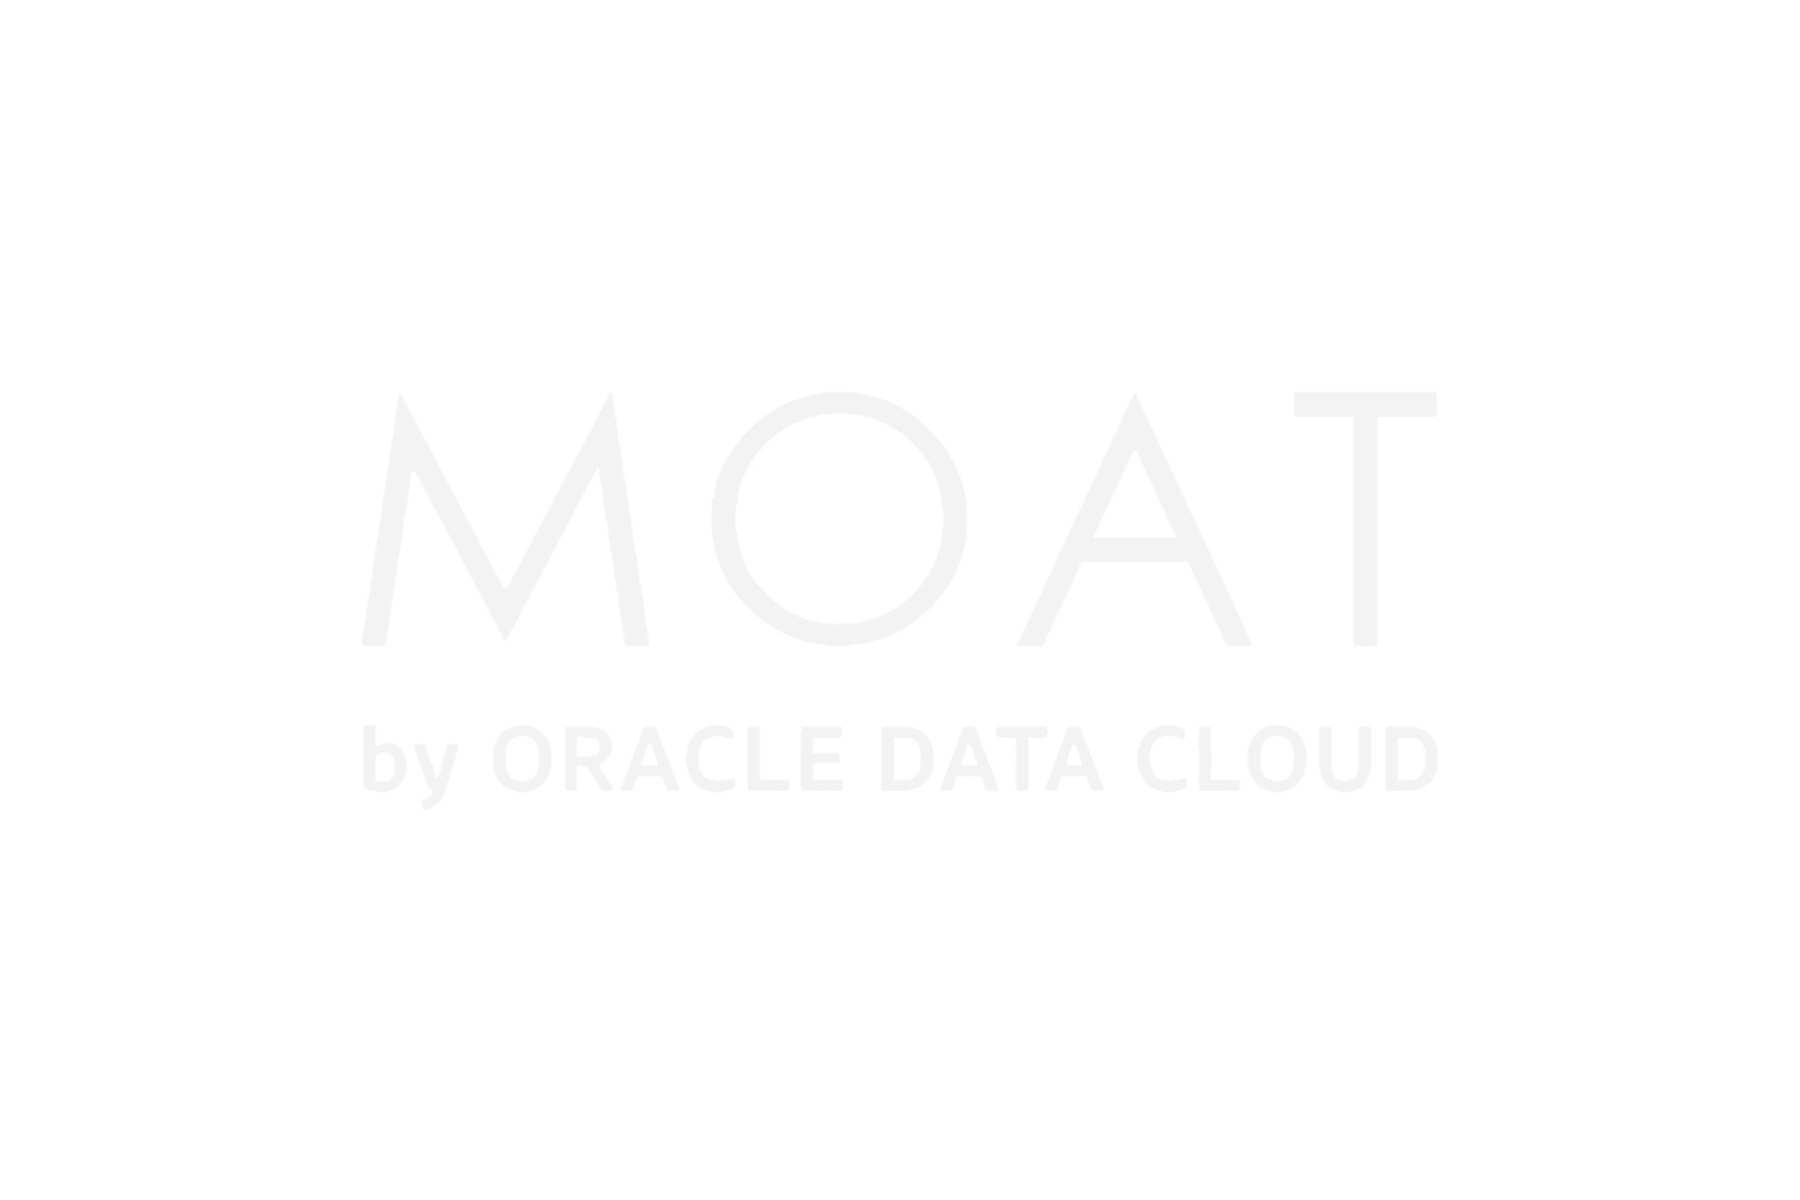 MOAT by Oracle Data Cloud (Copy)